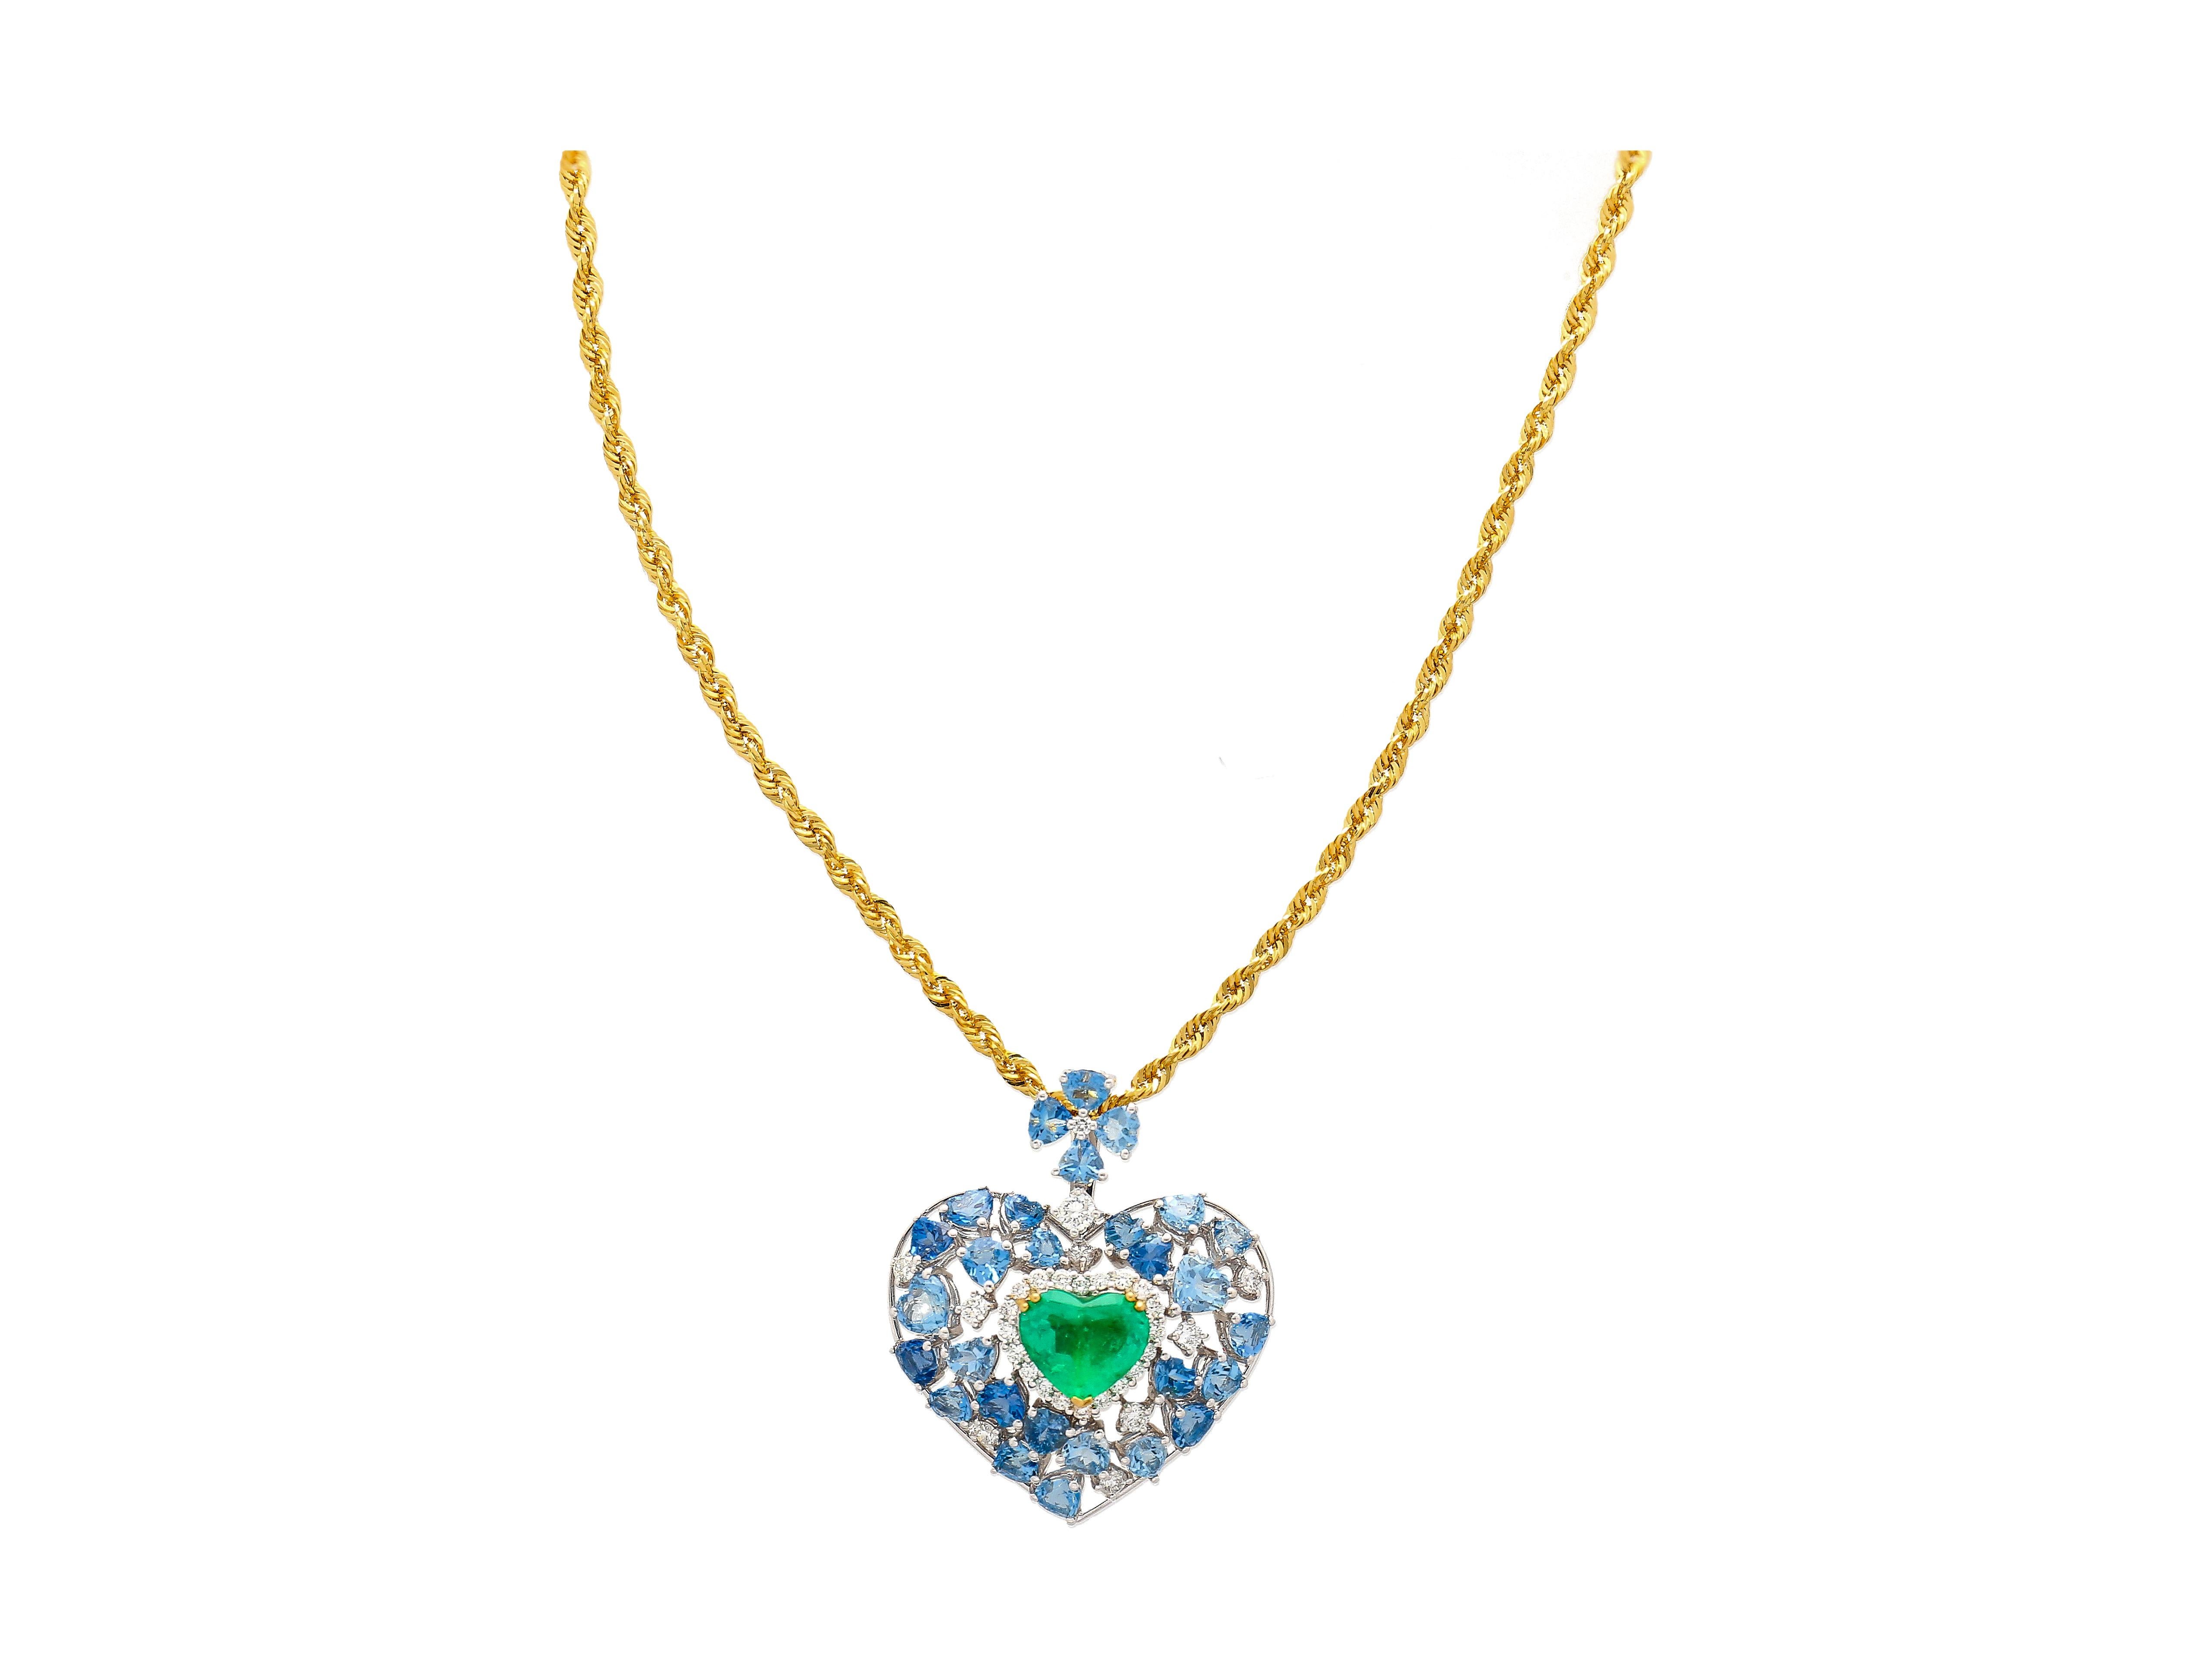 Jewelry Details:
Item Type: Necklace
Metal Type: 18K White Gold
Gemstones: Colombian Emerald, Aquamarine, Diamond
Weight: 8.67 grams 
Size: 21 inches long

Center Stone Details:
Gemstone Type: Emerald
Gemstone Origin: Colombia
Carat: 2.73